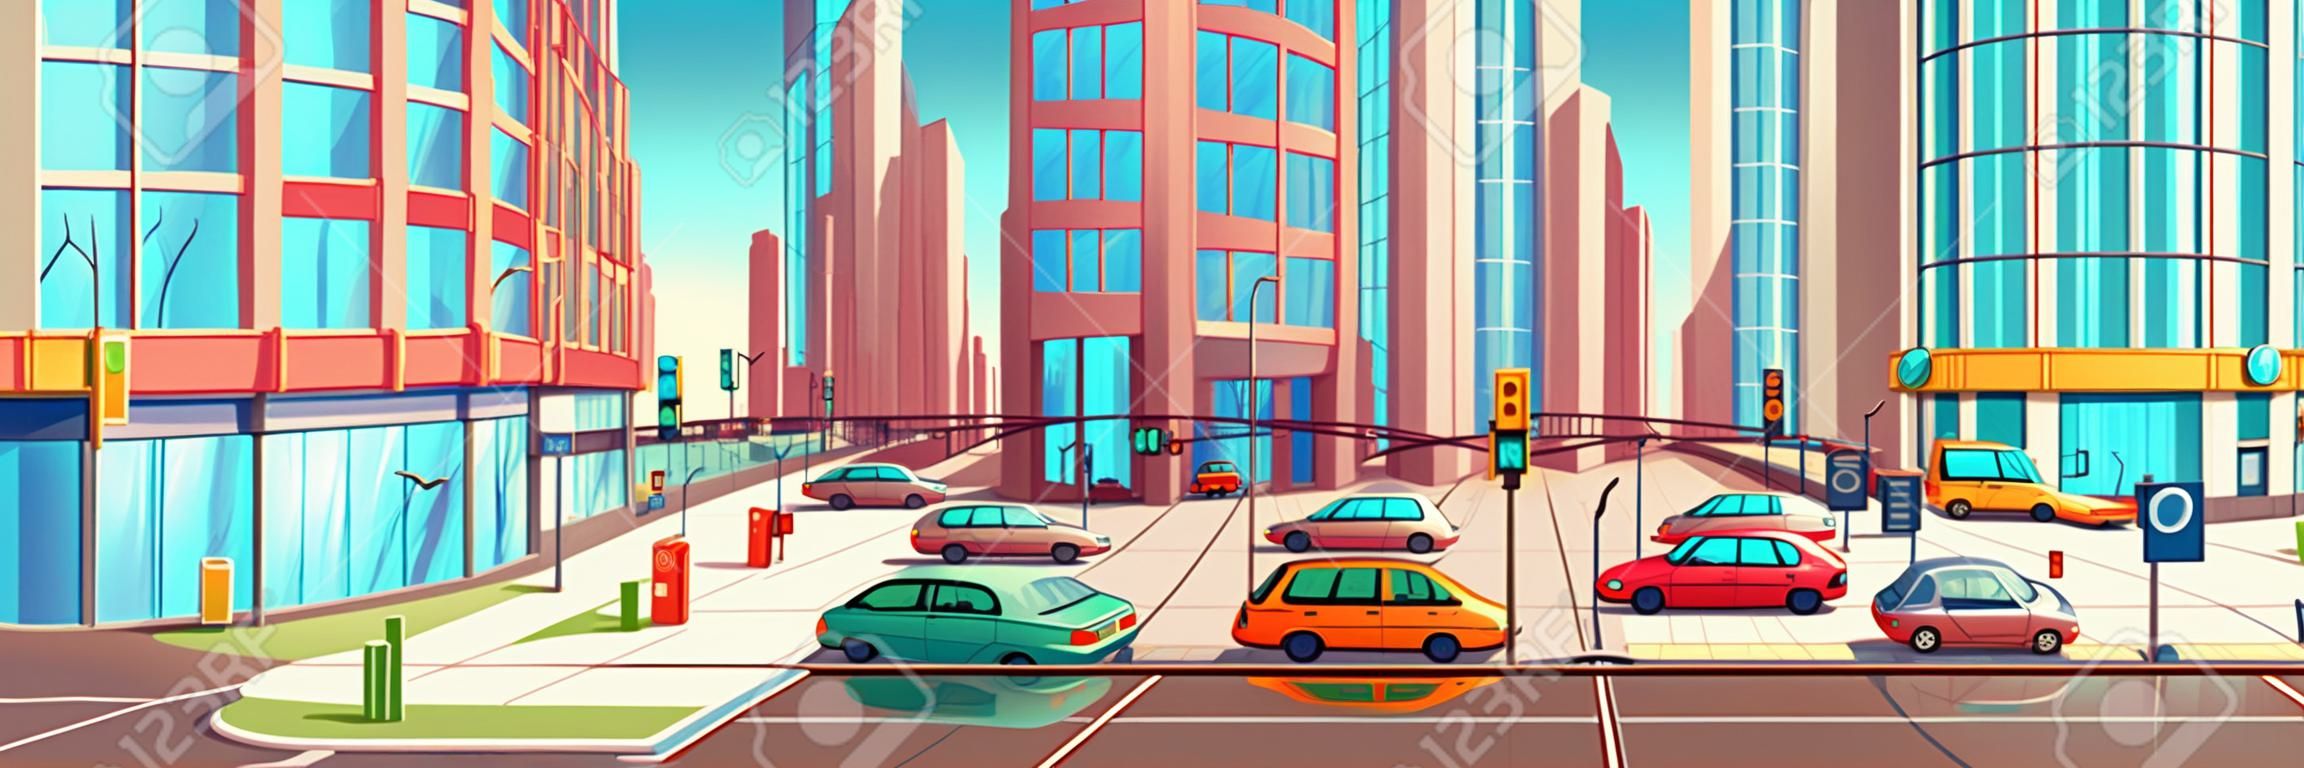 Metropolis crossroads in hour rush cartoon vector concept with stores showcases in skyscrapers buildings, sidewalks, underground pedestrian walkway and cars going on two lane city road illustration